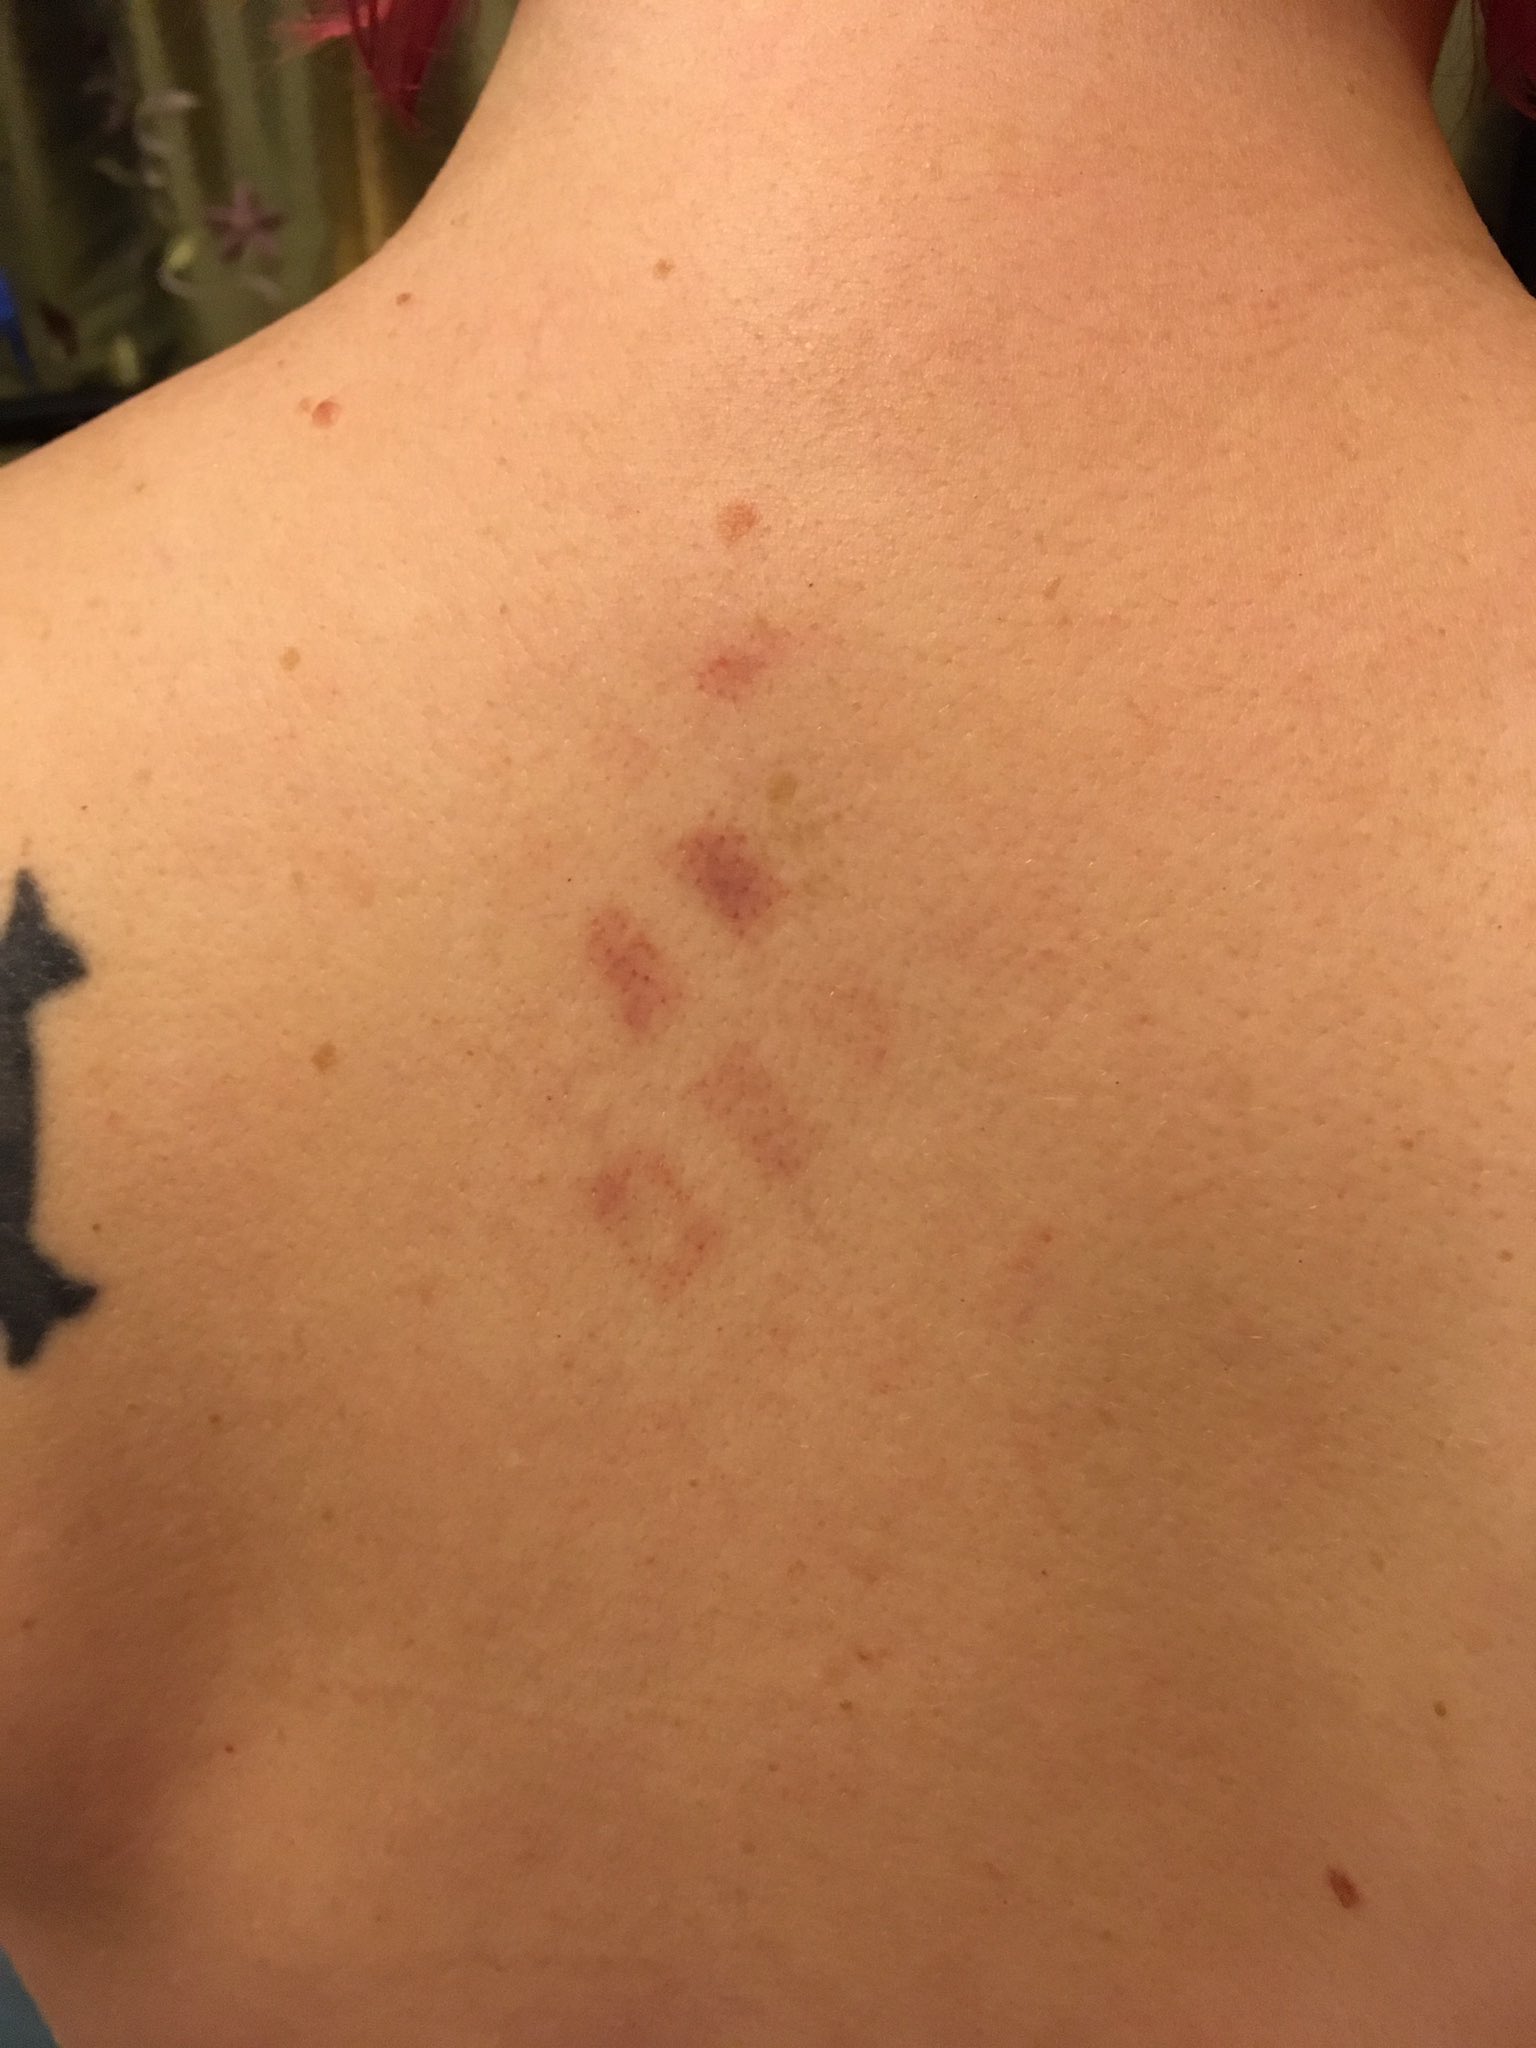 Kat Stark on X: Mysterious crosshatch bruise appeared on my back. Have no  explanation. Tried on all shirts/bras worn recently but ??   / X